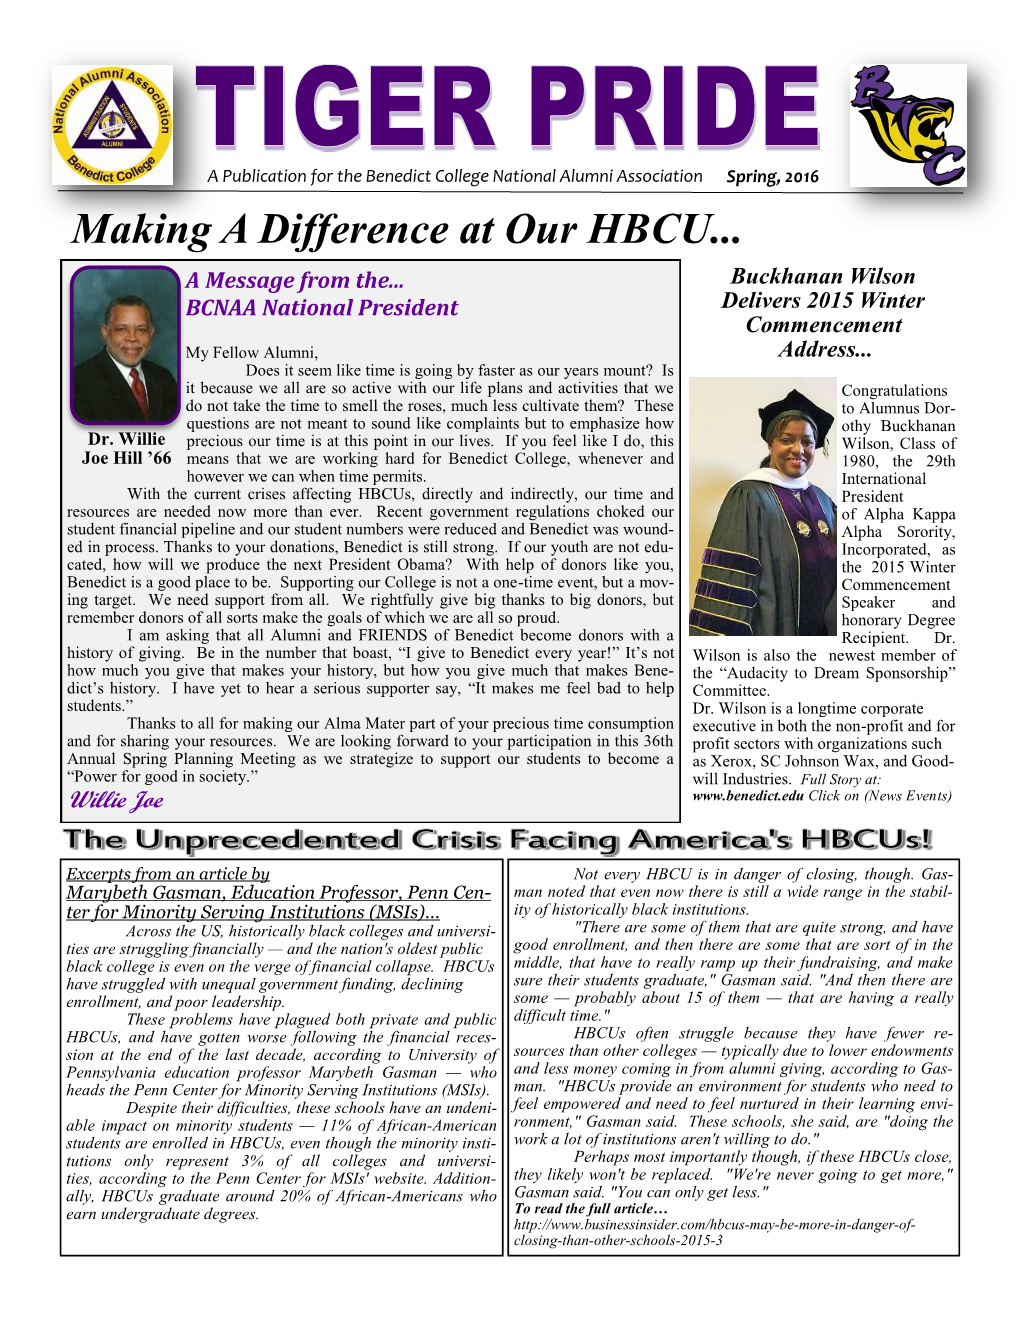 Making a Difference at Our HBCU... a Message from The